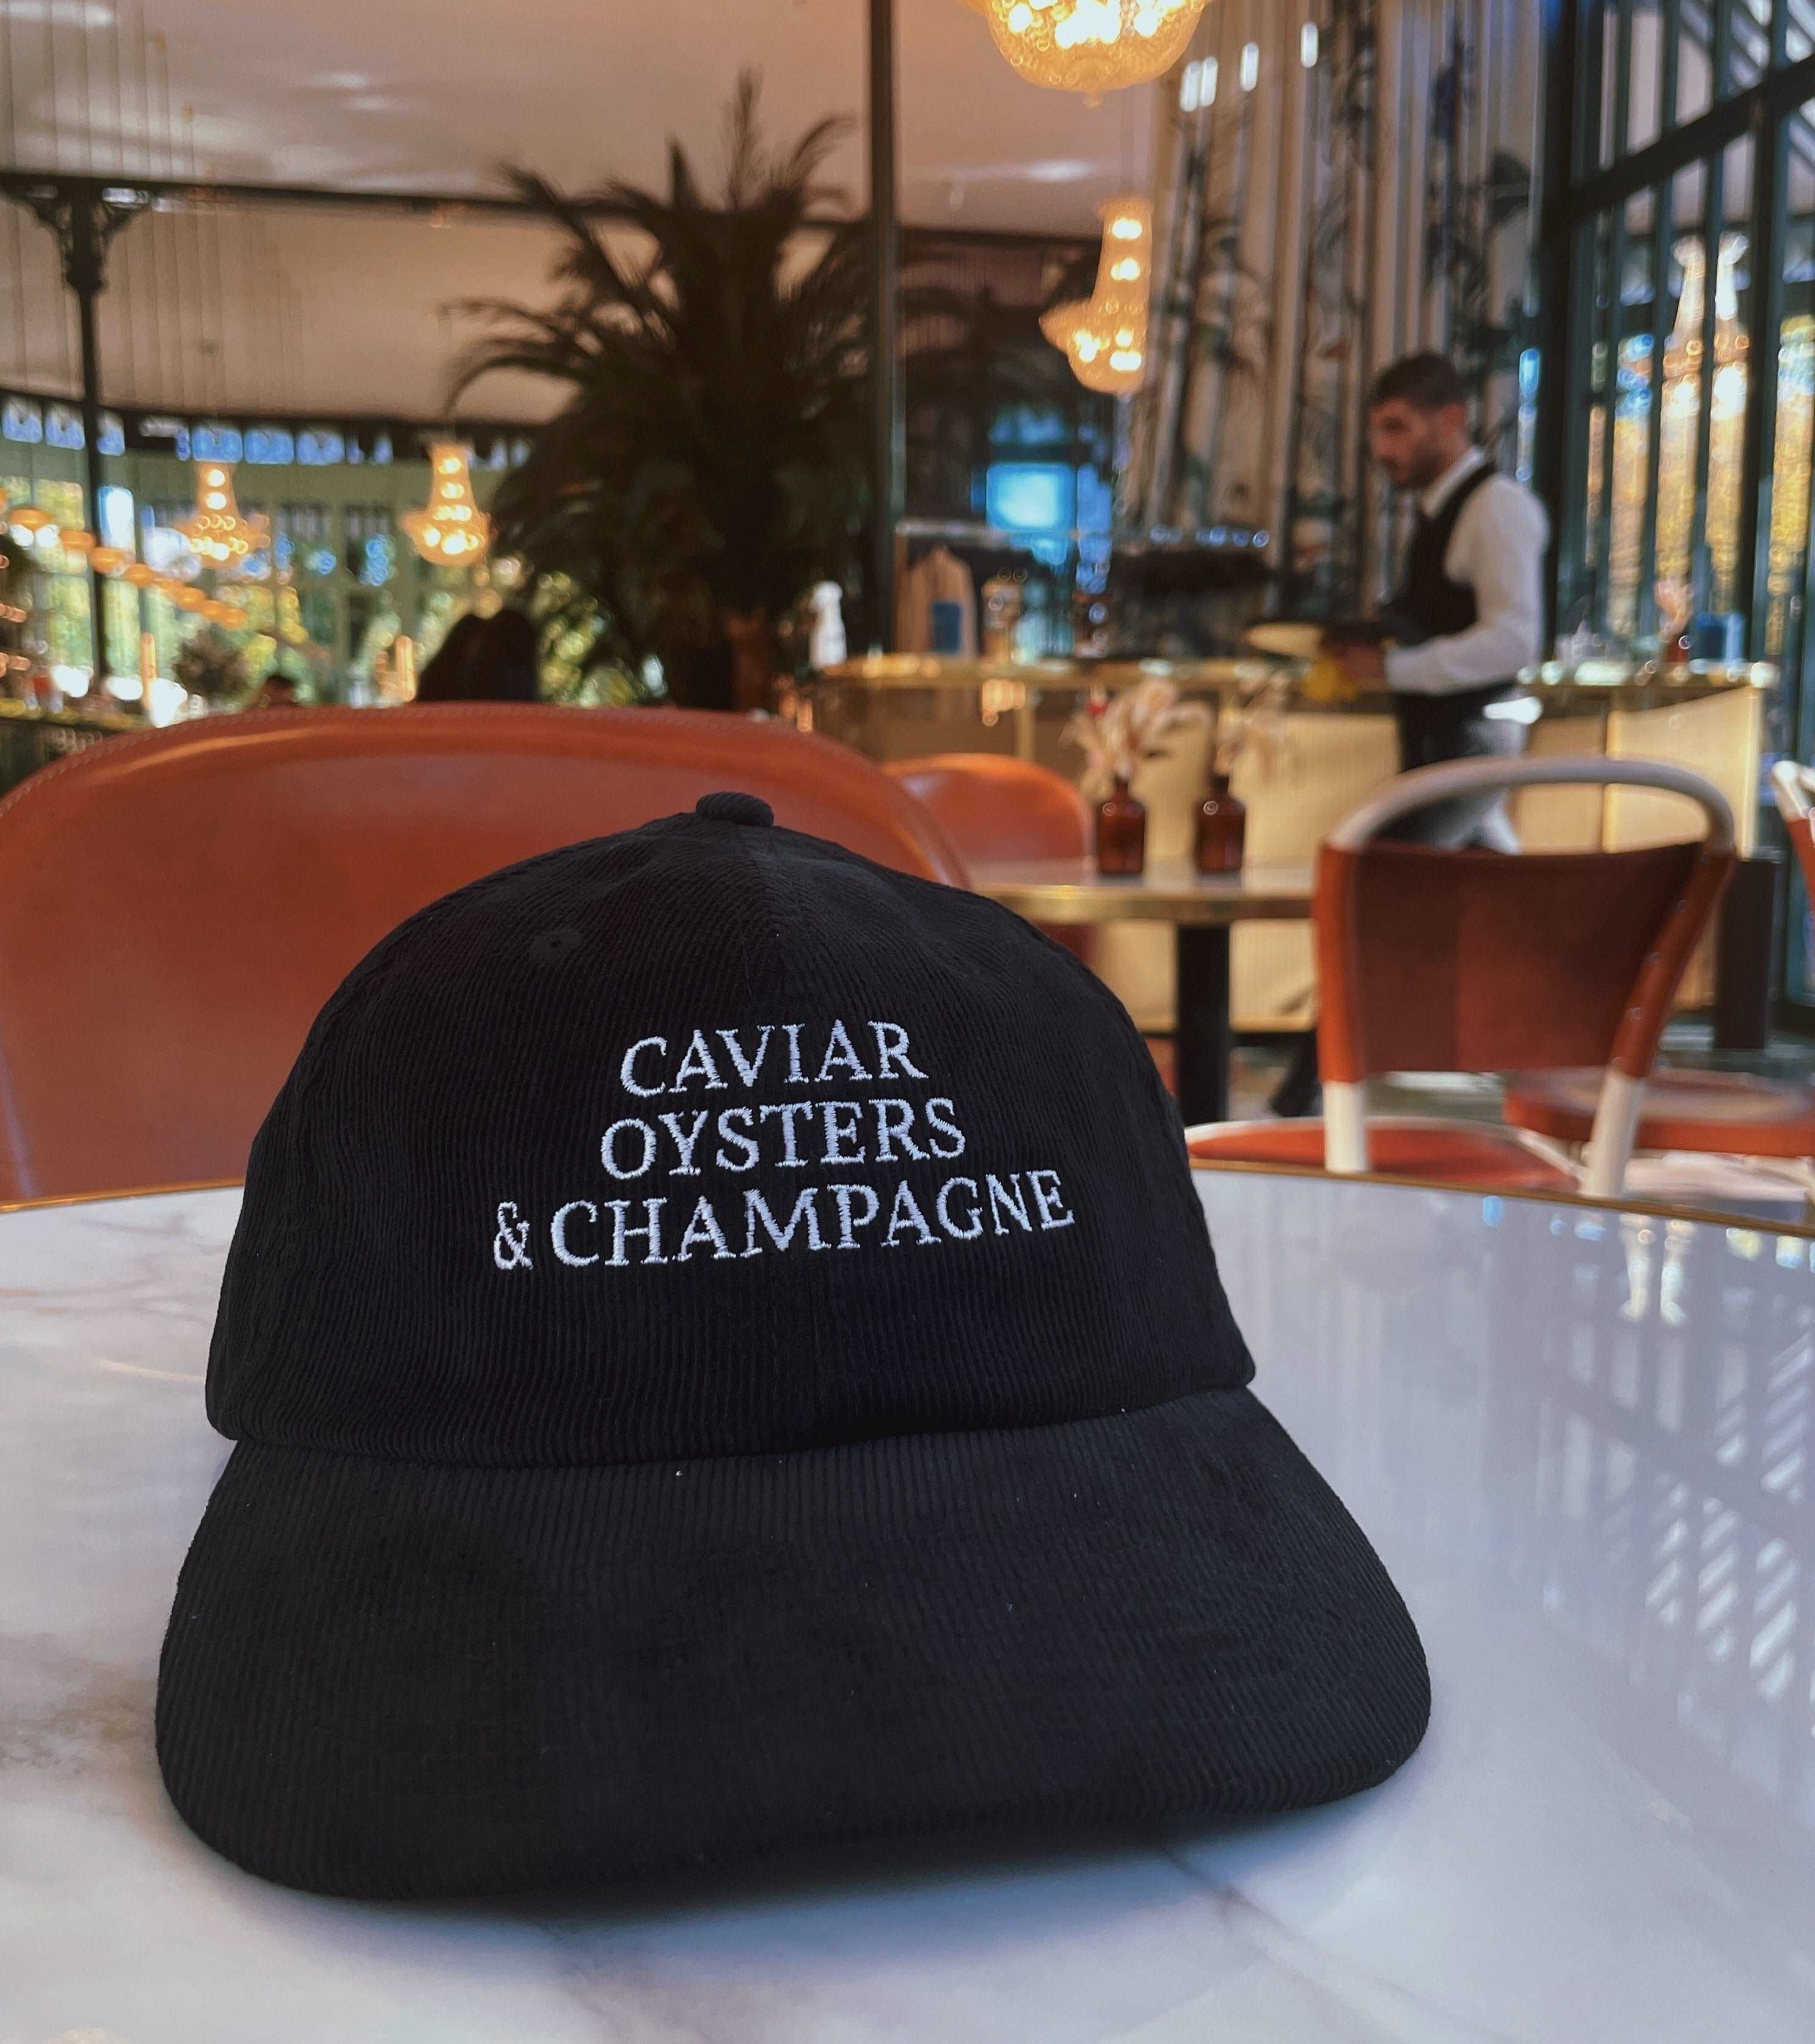 Caviar, oysters & Champagne - Corduroy Cap - The Refined Spirit